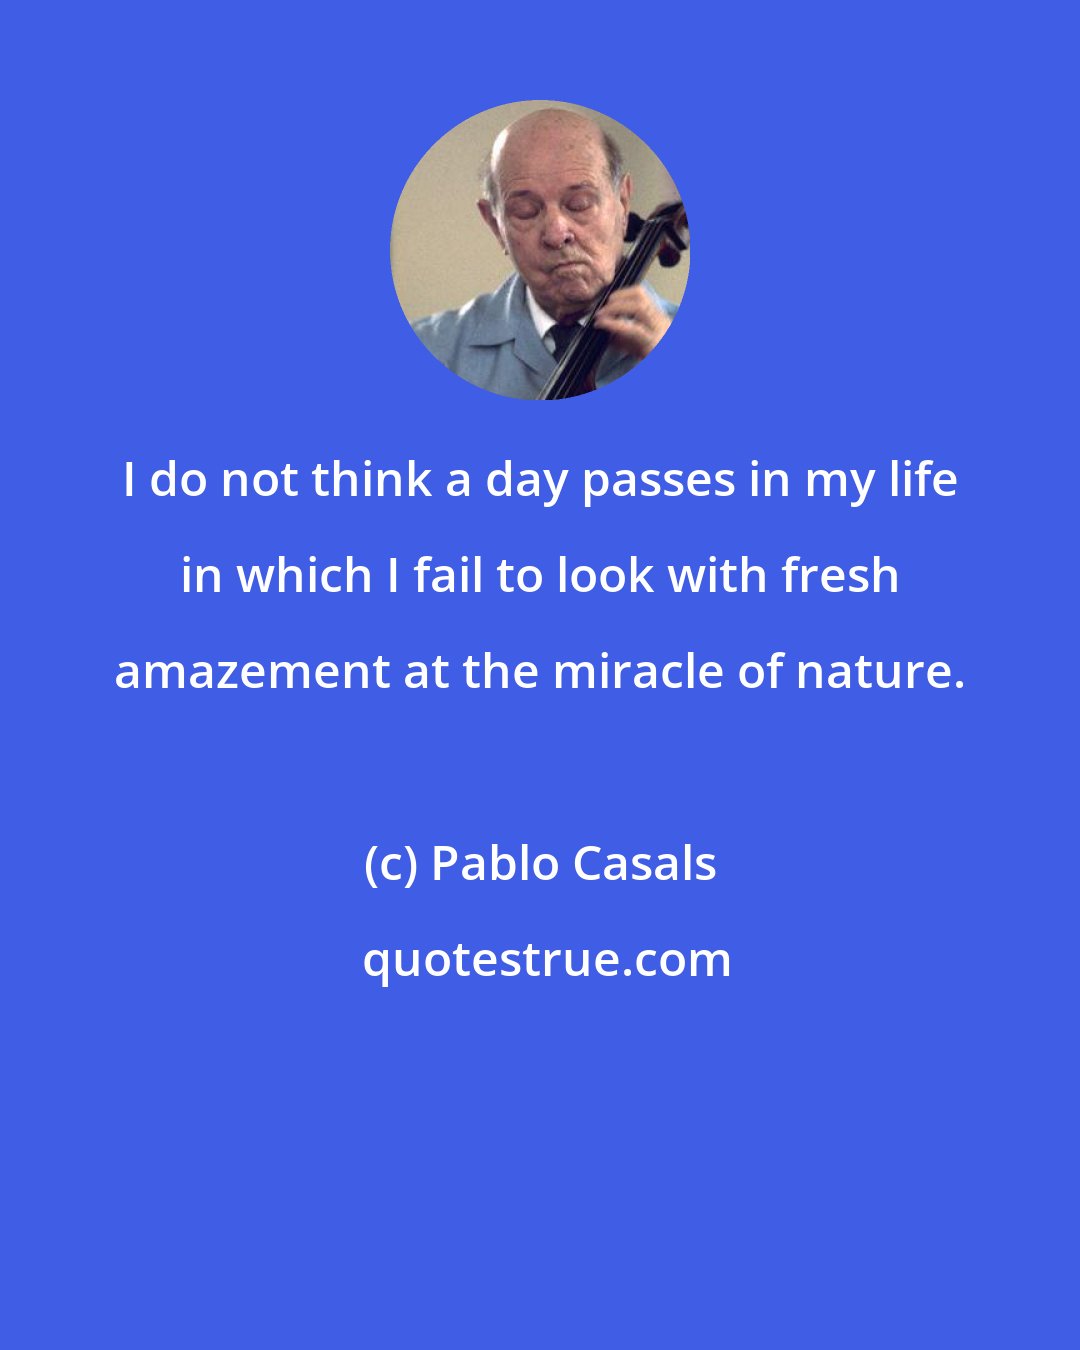 Pablo Casals: I do not think a day passes in my life in which I fail to look with fresh amazement at the miracle of nature.